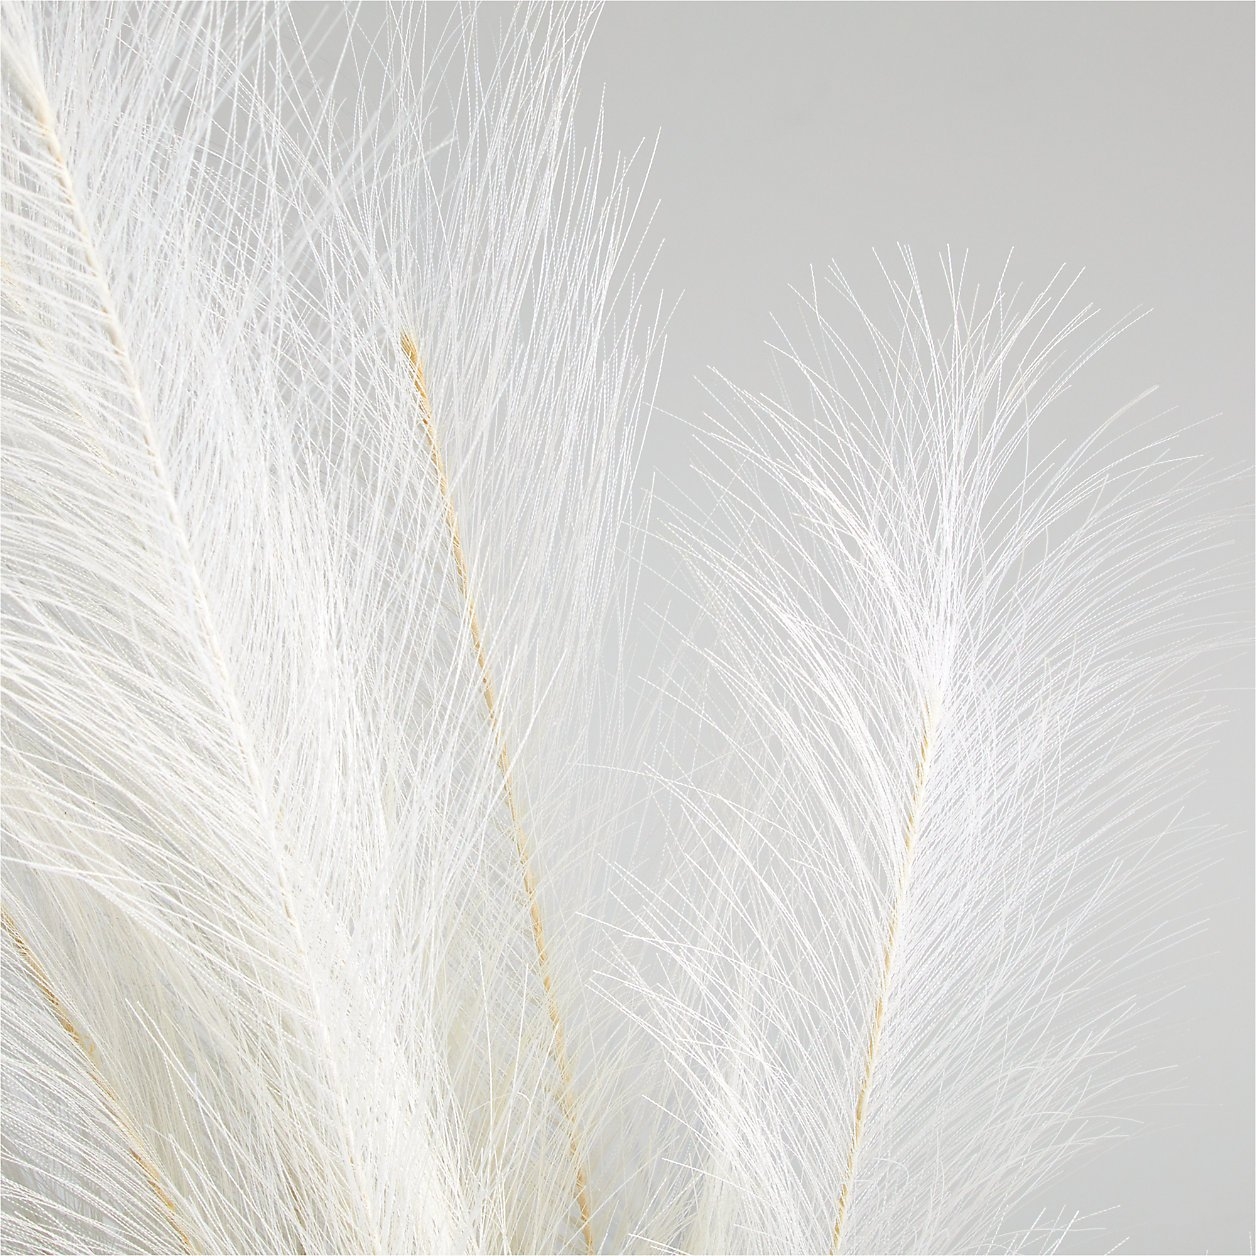 Faux Ivory Pampas Grass Bunch - Image 2